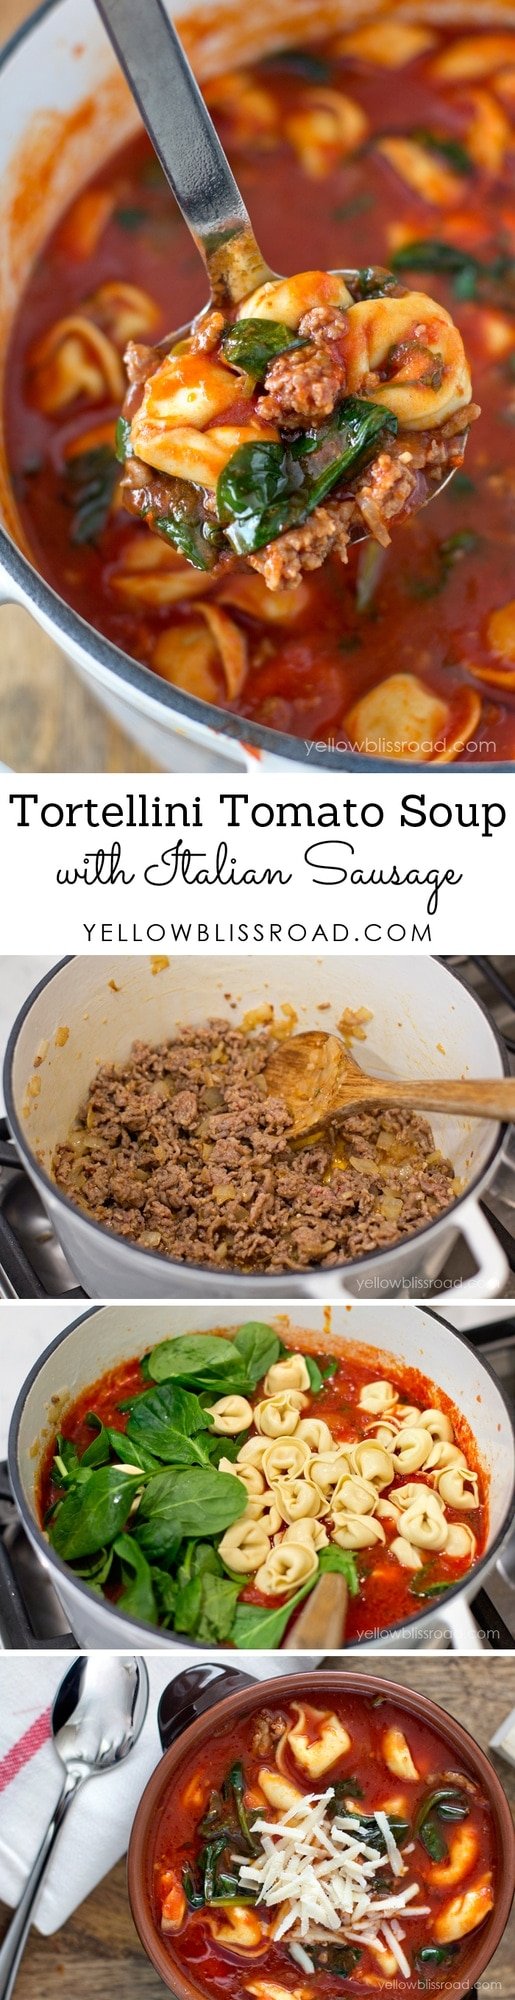 Tortellini Tomato and Spinach Soup with Italian Sausage